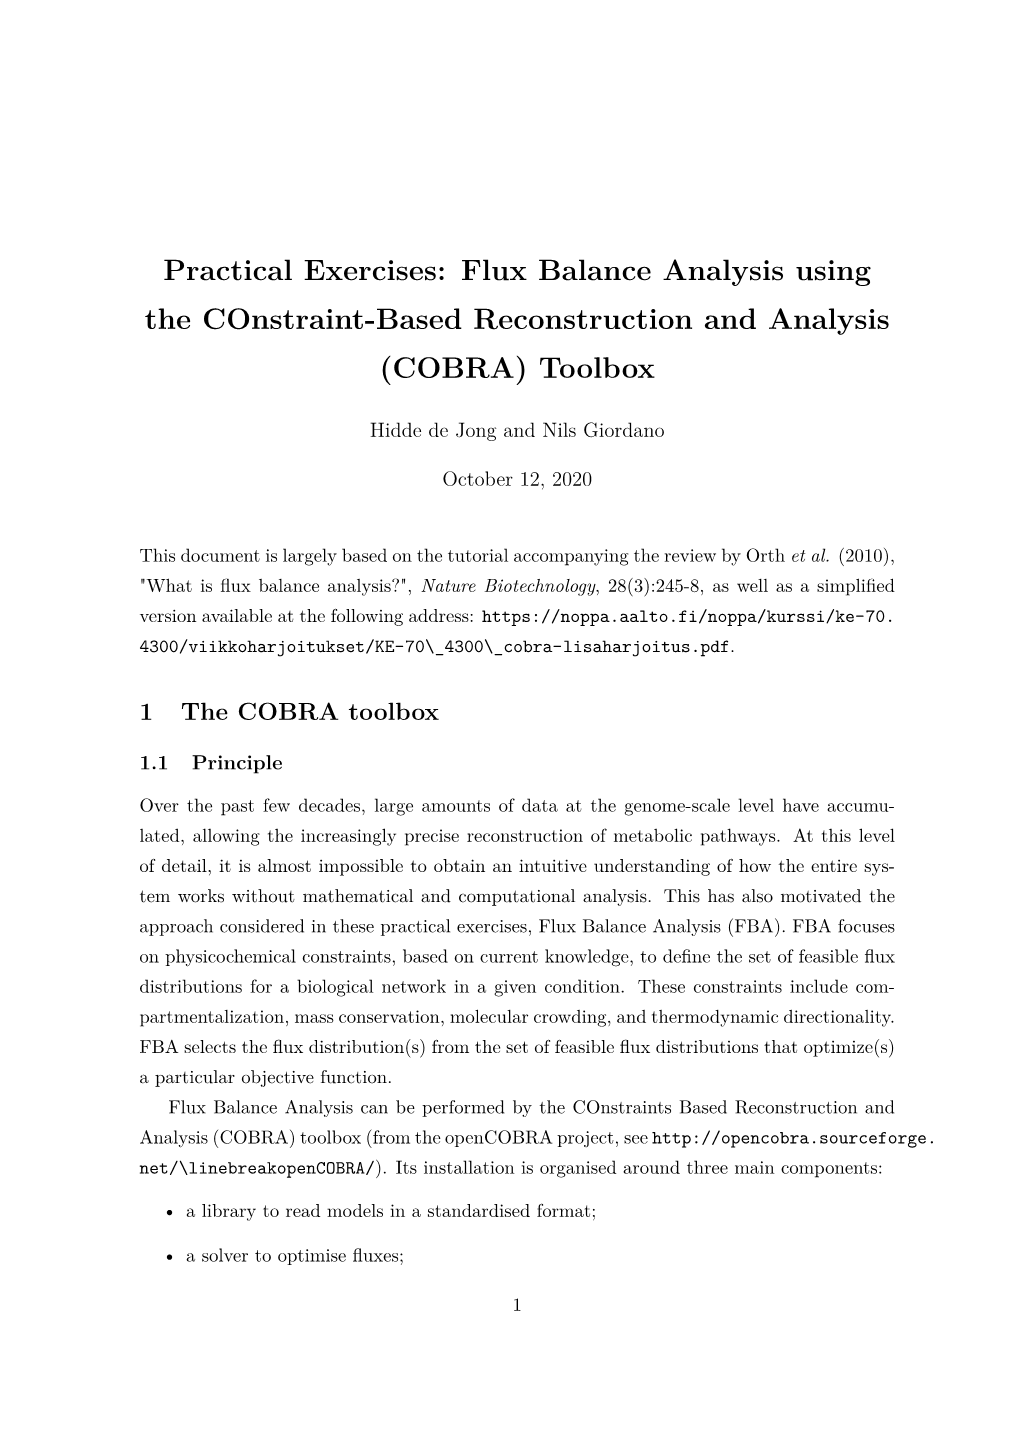 Practical Exercises: Flux Balance Analysis Using the Constraint-Based Reconstruction and Analysis (COBRA) Toolbox